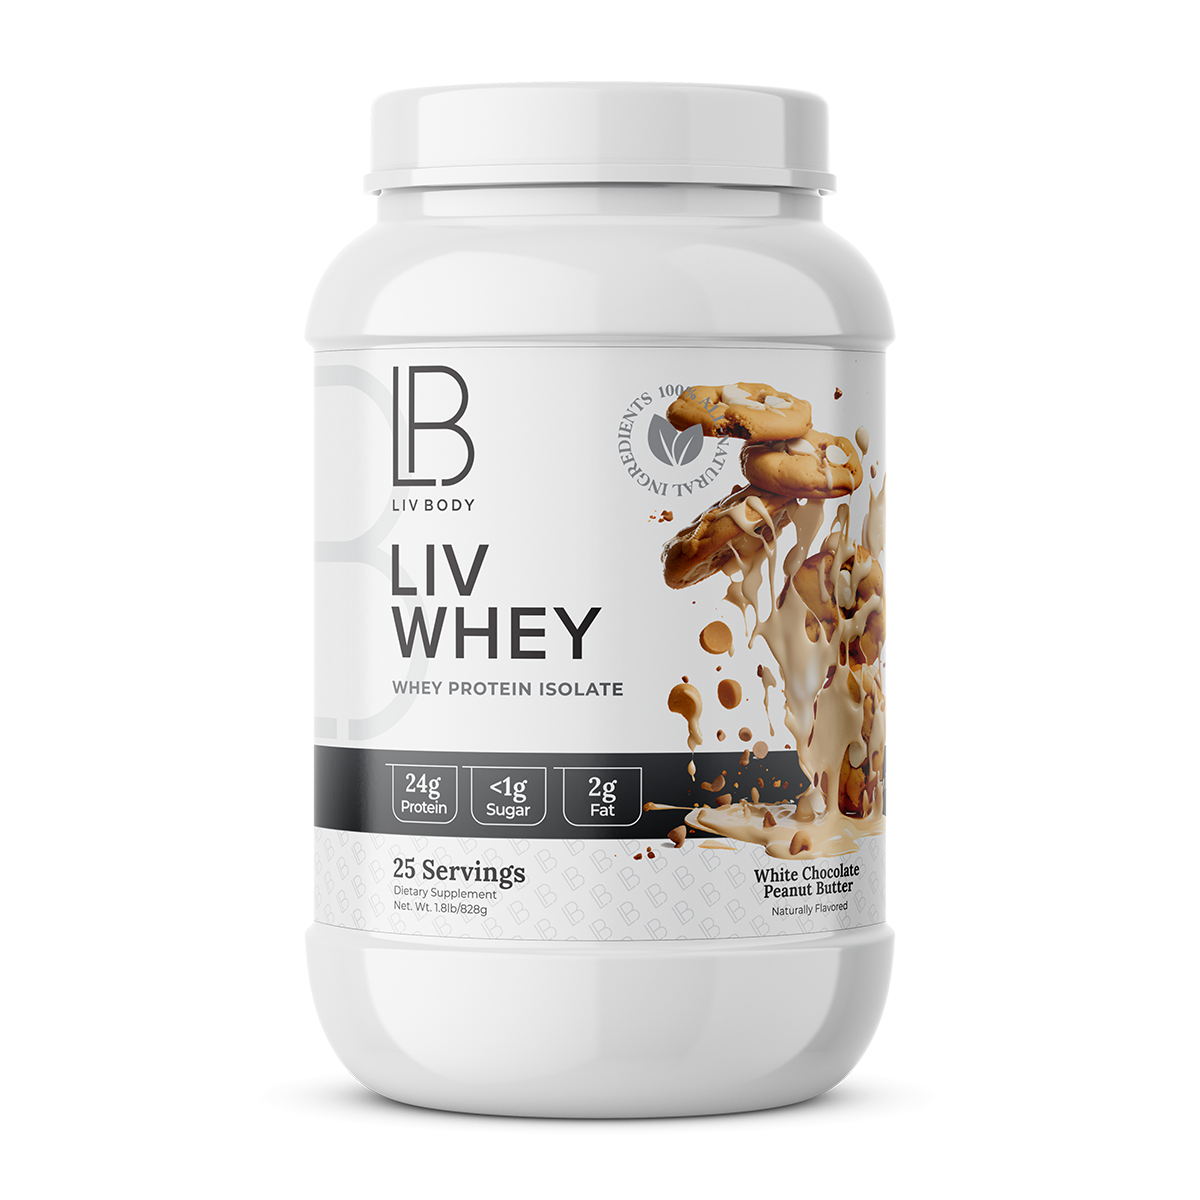 Picture of LIV Whey - Isolate Protein, ingested to promote muscle growth and lean body mass.